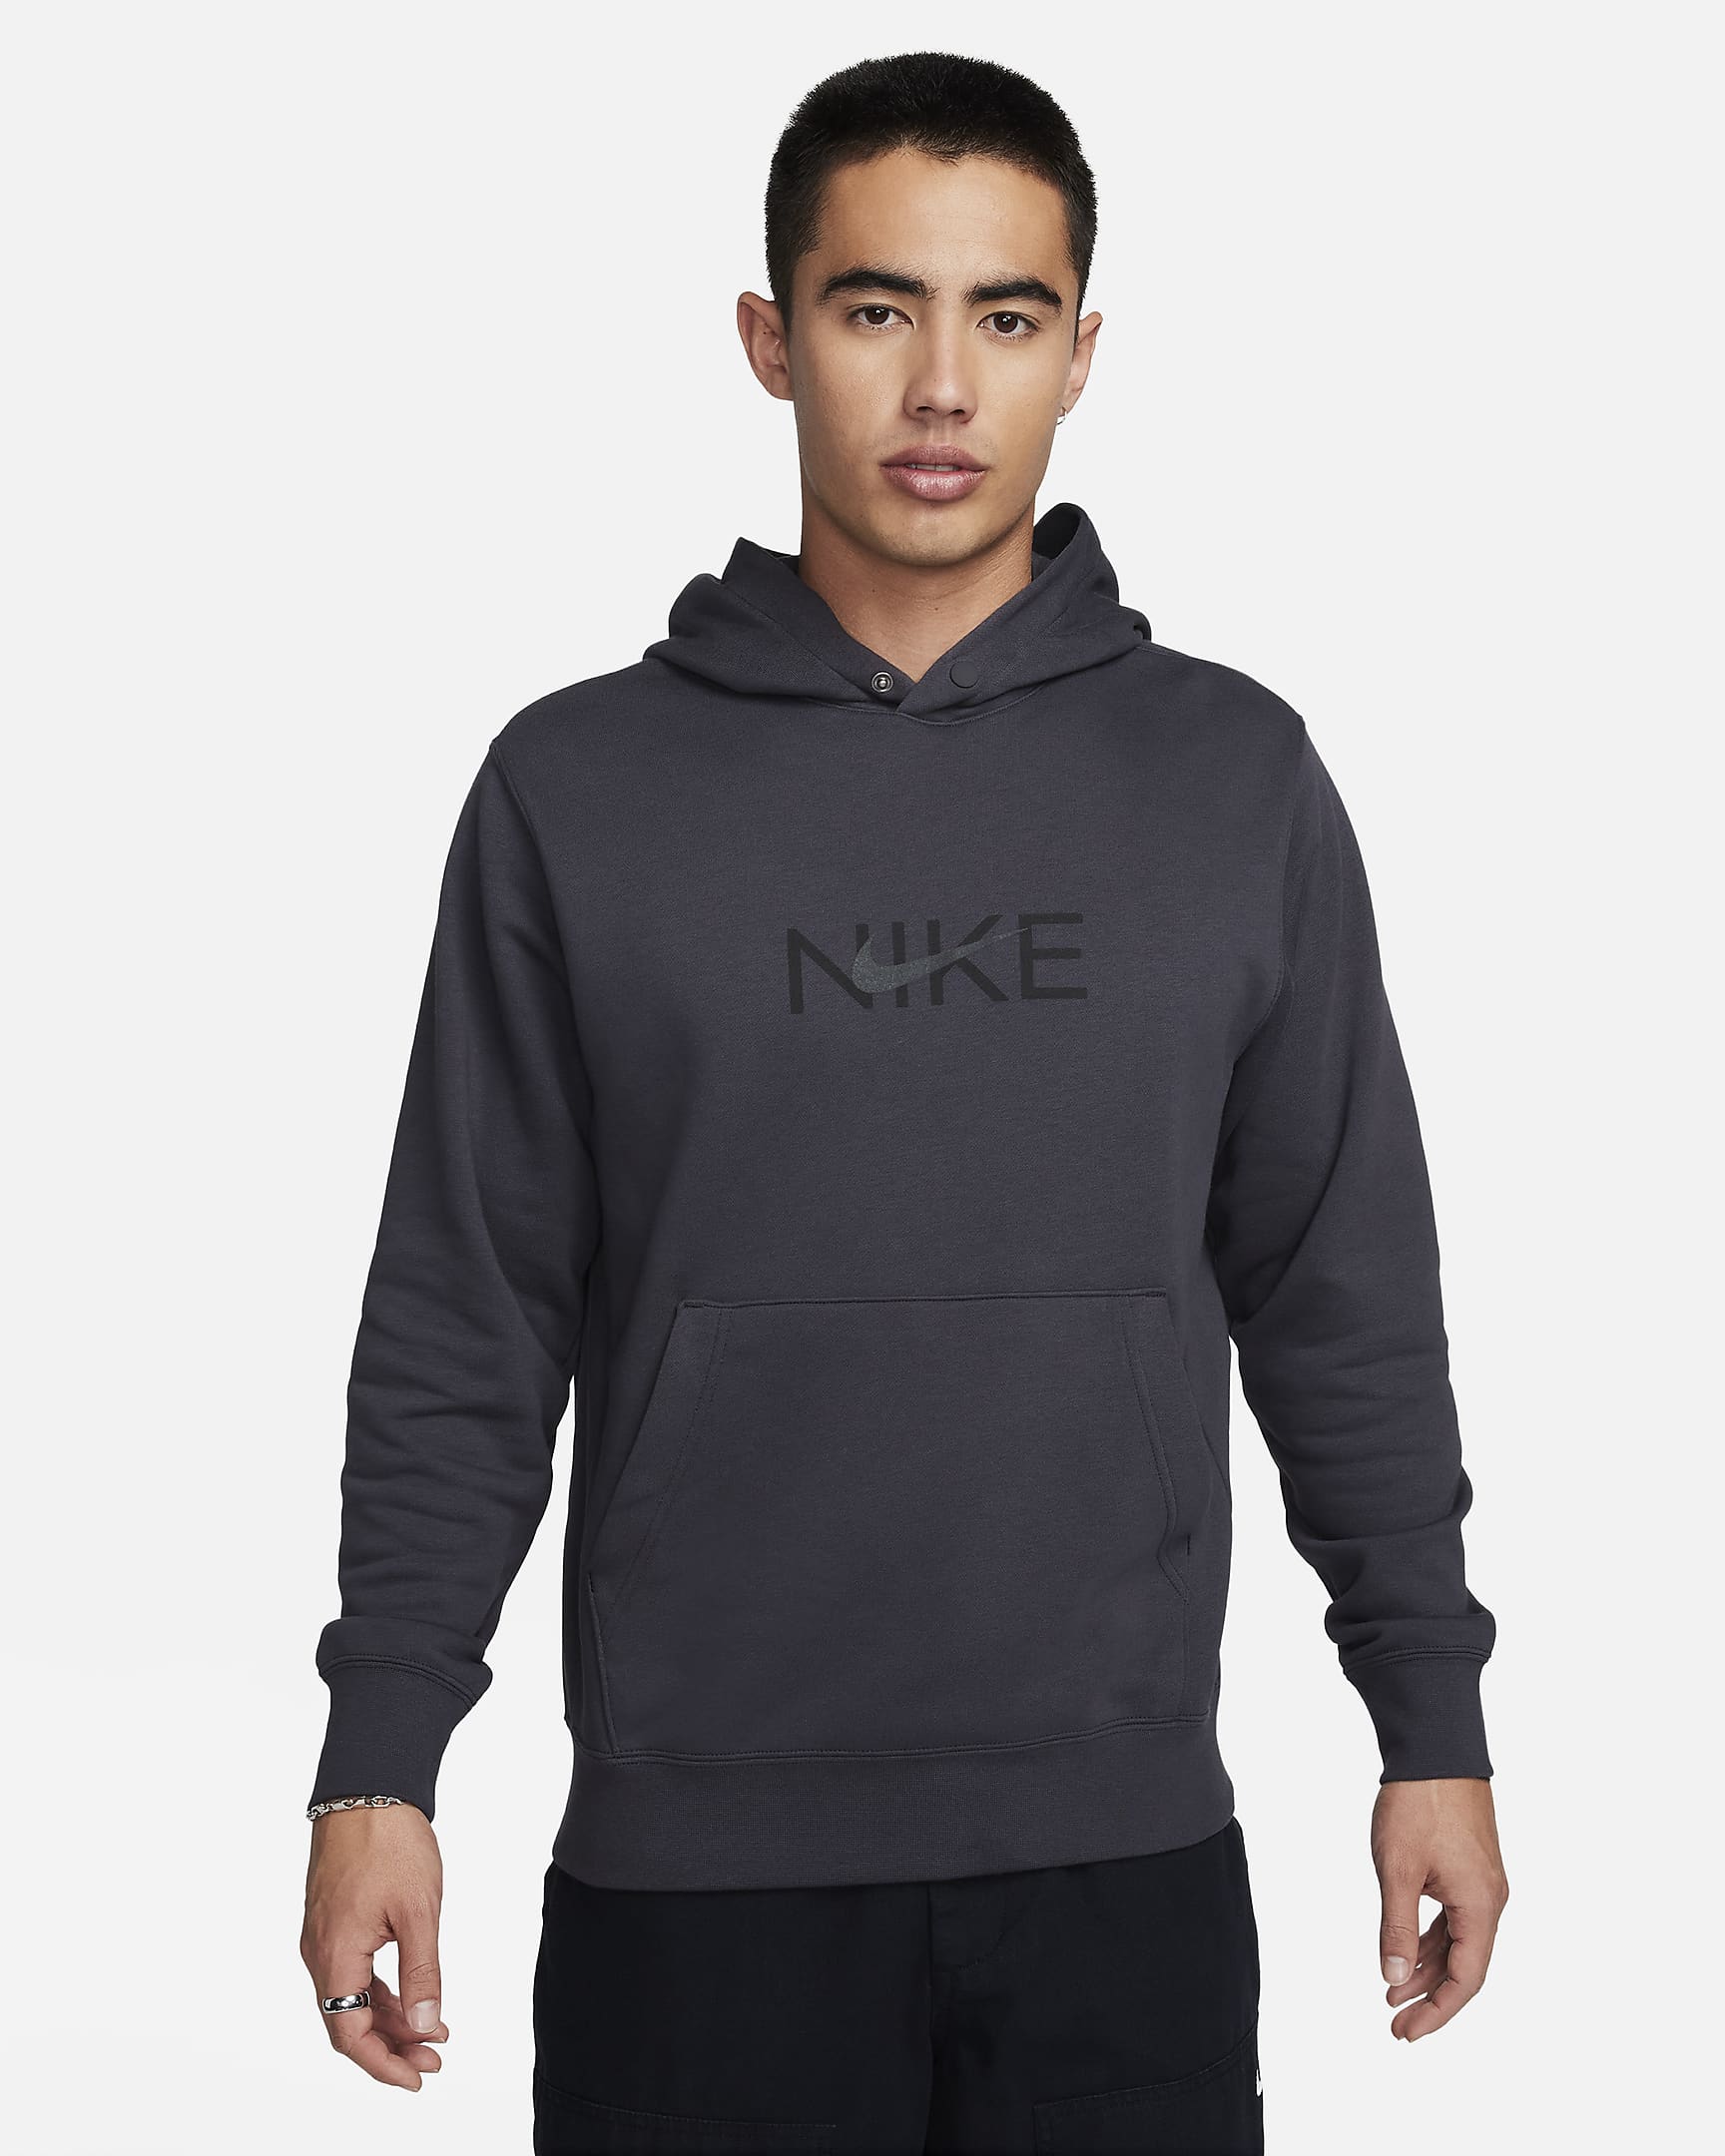 Nike Sportswear Men's French Terry Pullover Hoodie. Nike SG